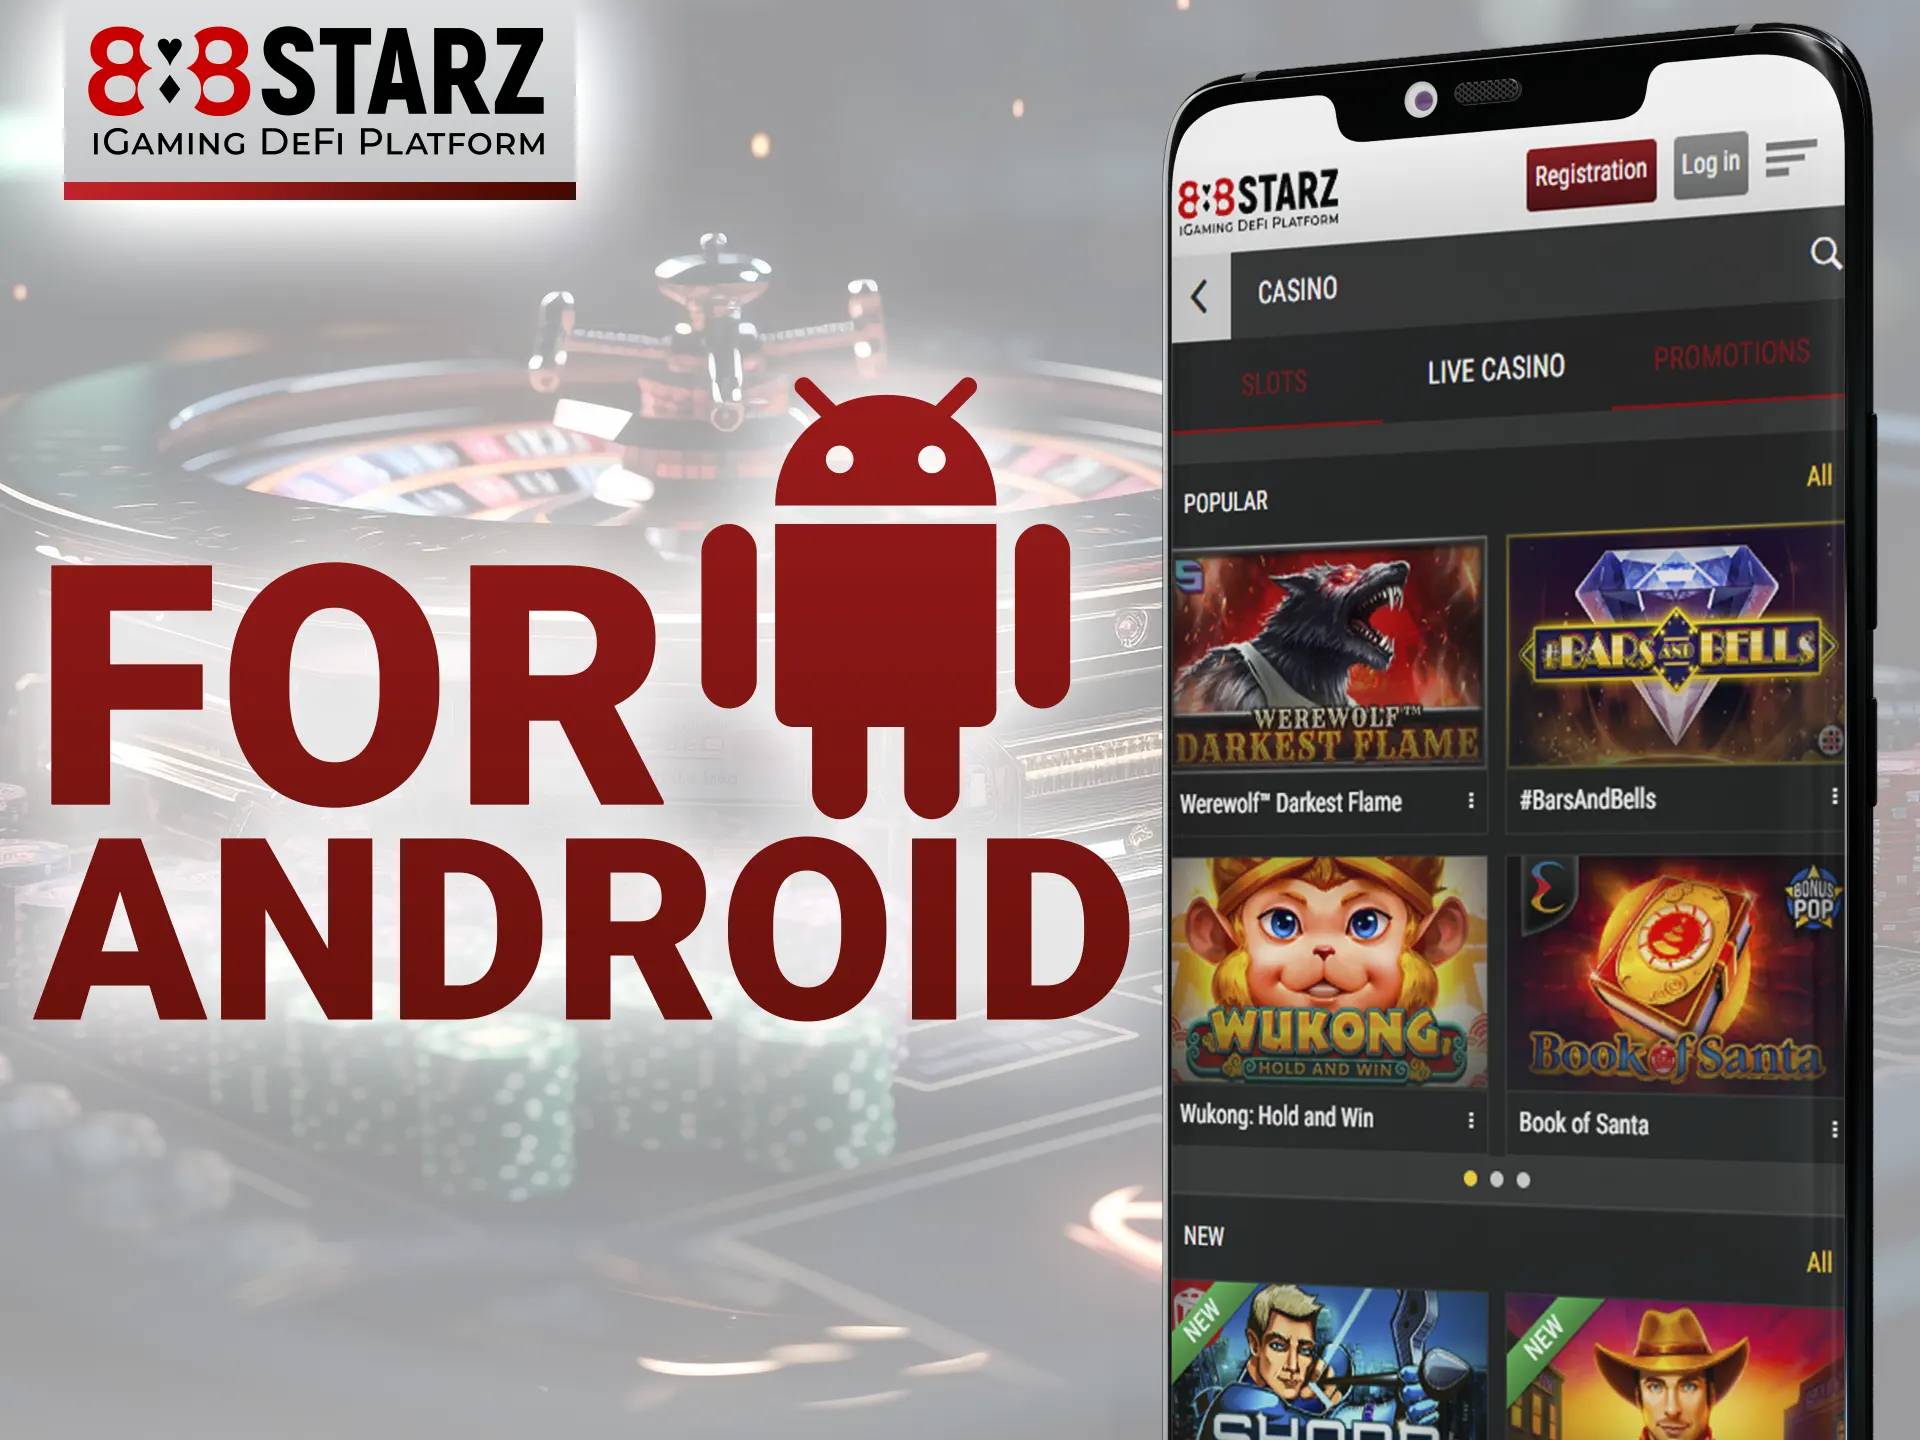 The 888starz mobile app is compatible with Android devices, and users can download the software from the 888starz website for free.